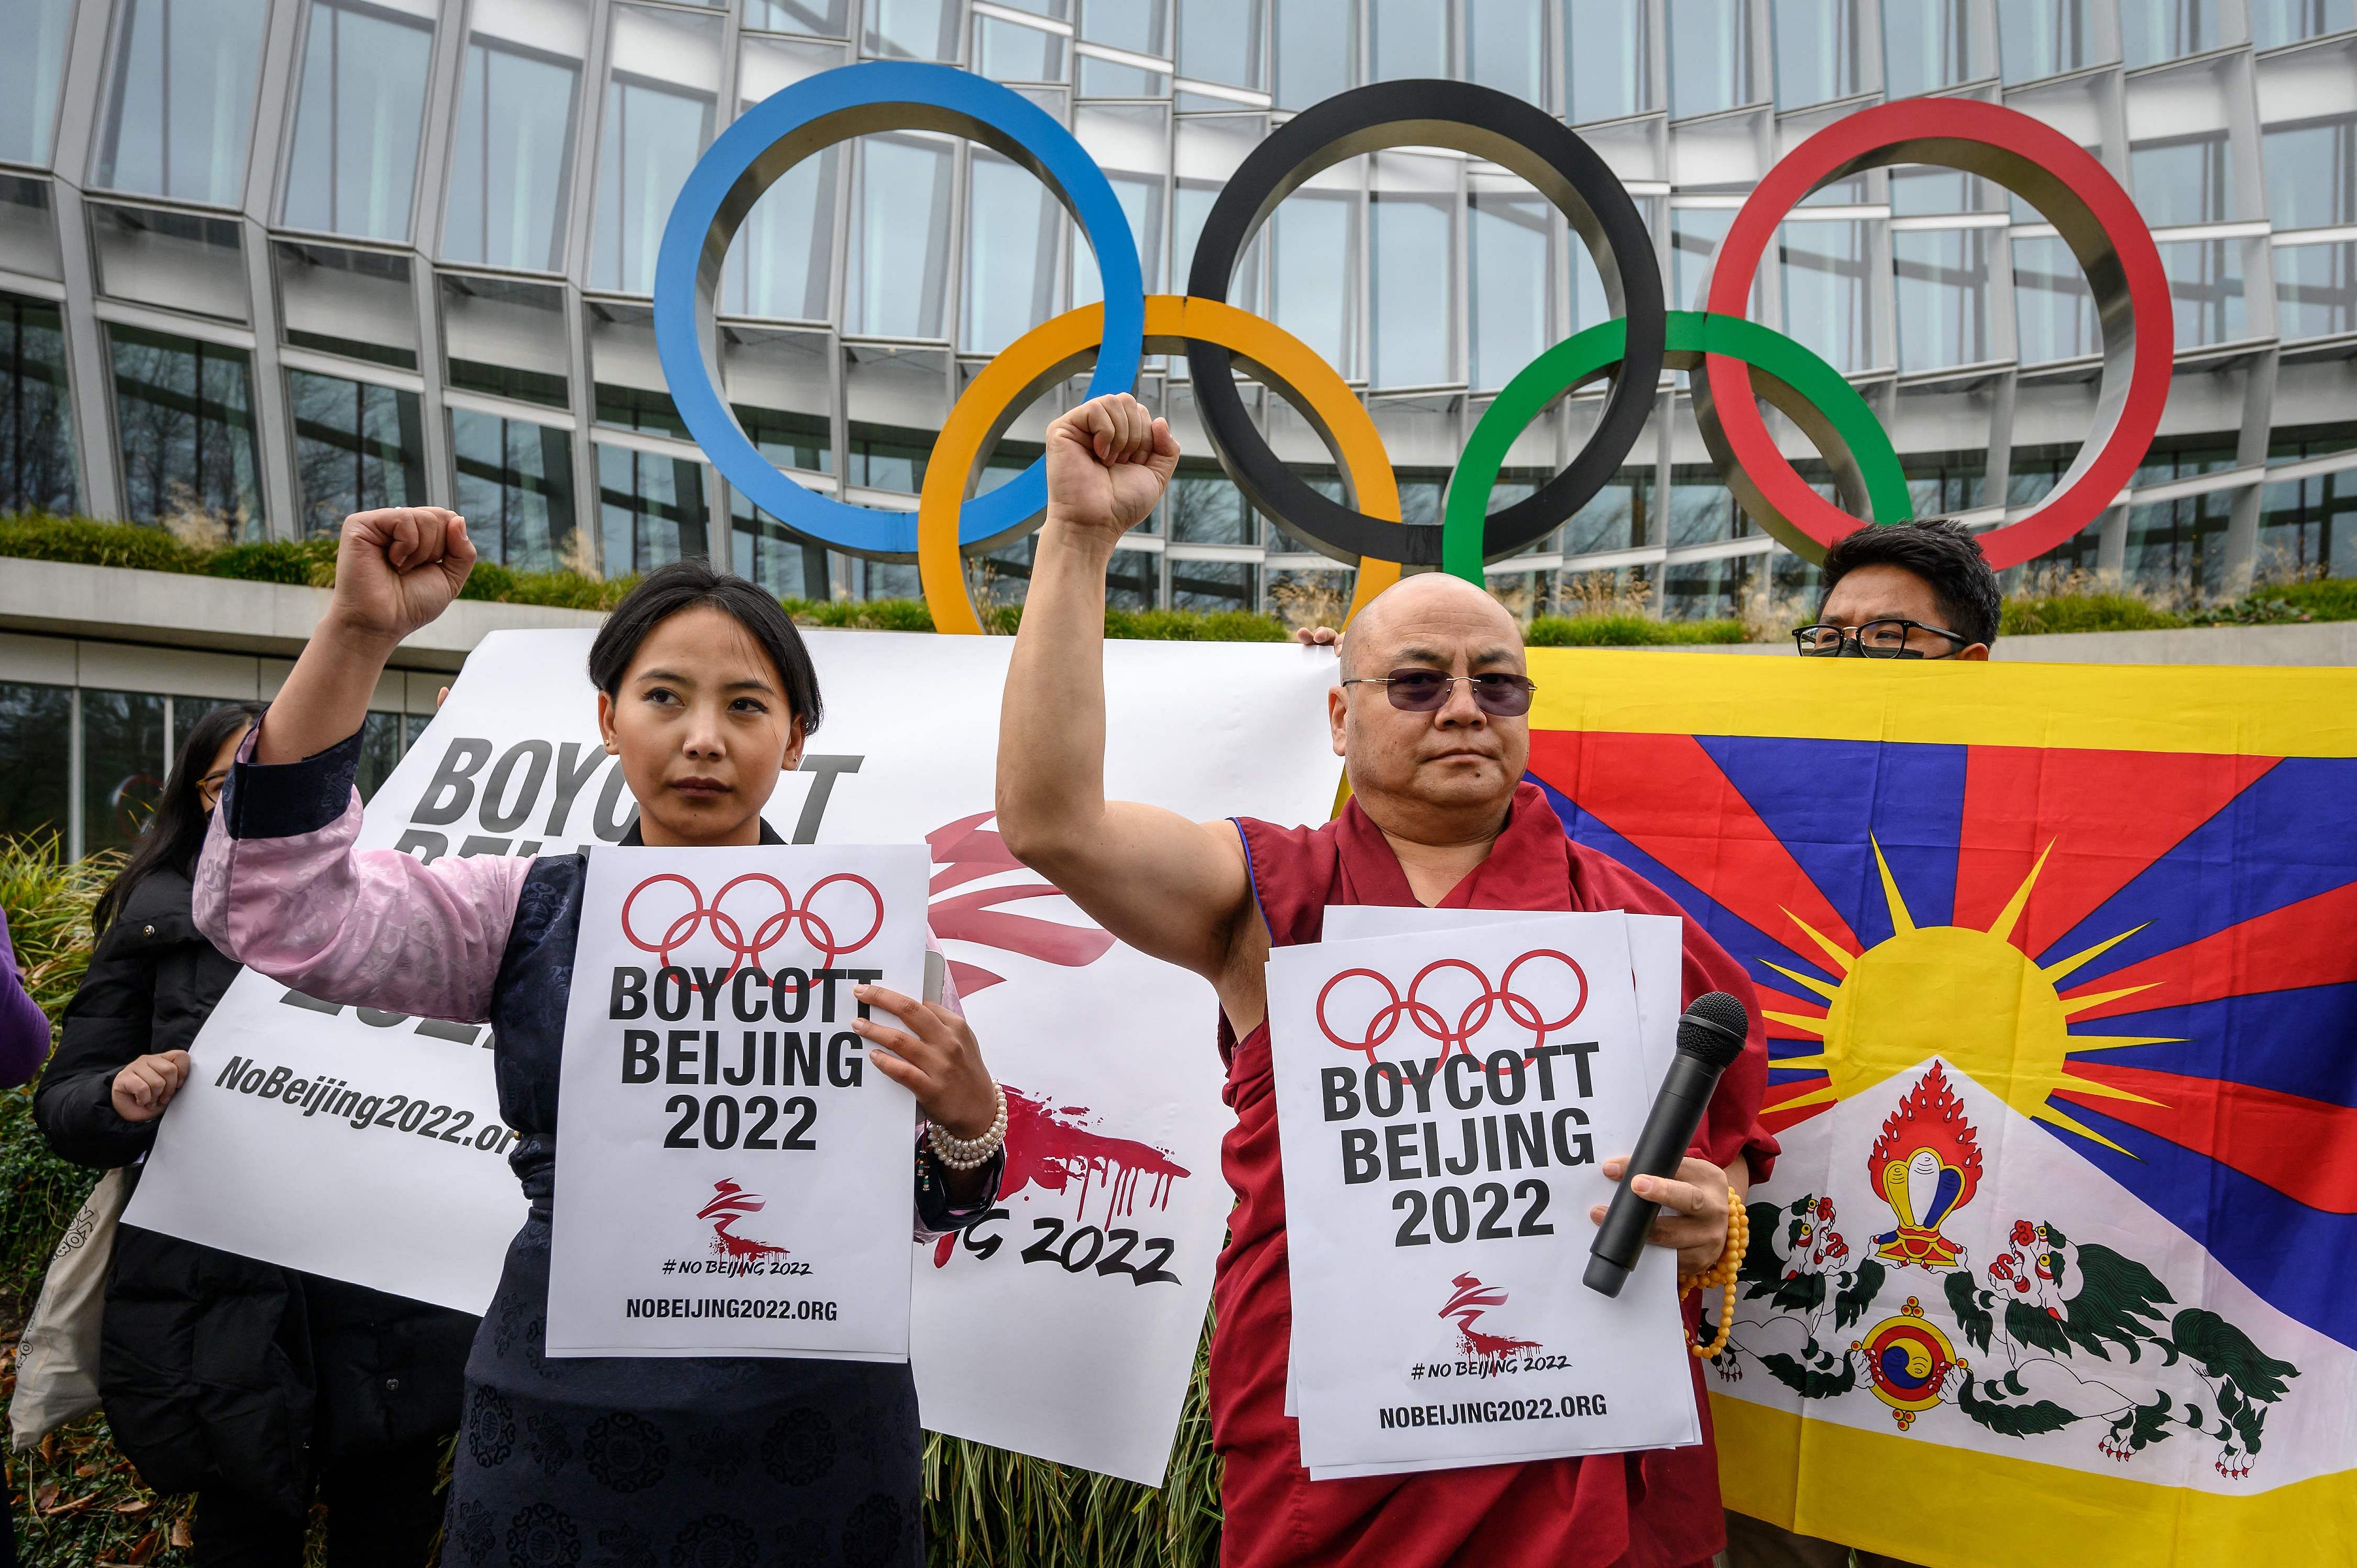 Tibetan activists stand in front of the International Olympic Committee (IOC) headquarters during a protest ahead of the February's Beijing 2022 Winter Olympics, on November 26, 2021 in Lausanne. Credit: AFP Photo